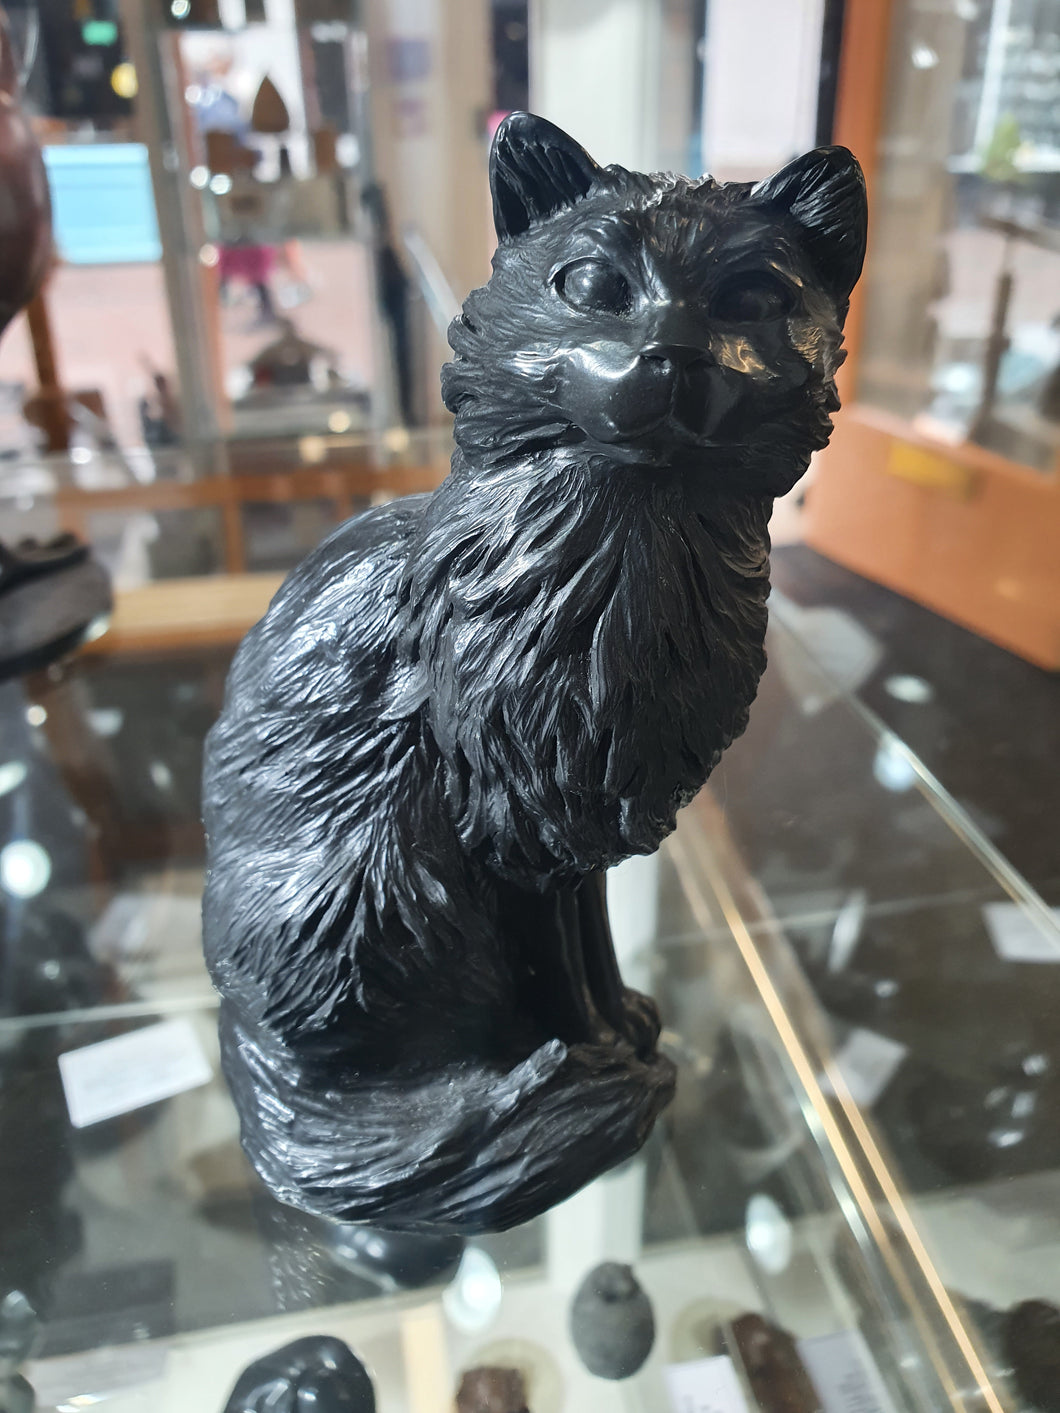 Orlando! Limited edition number 61 Black fury Cat